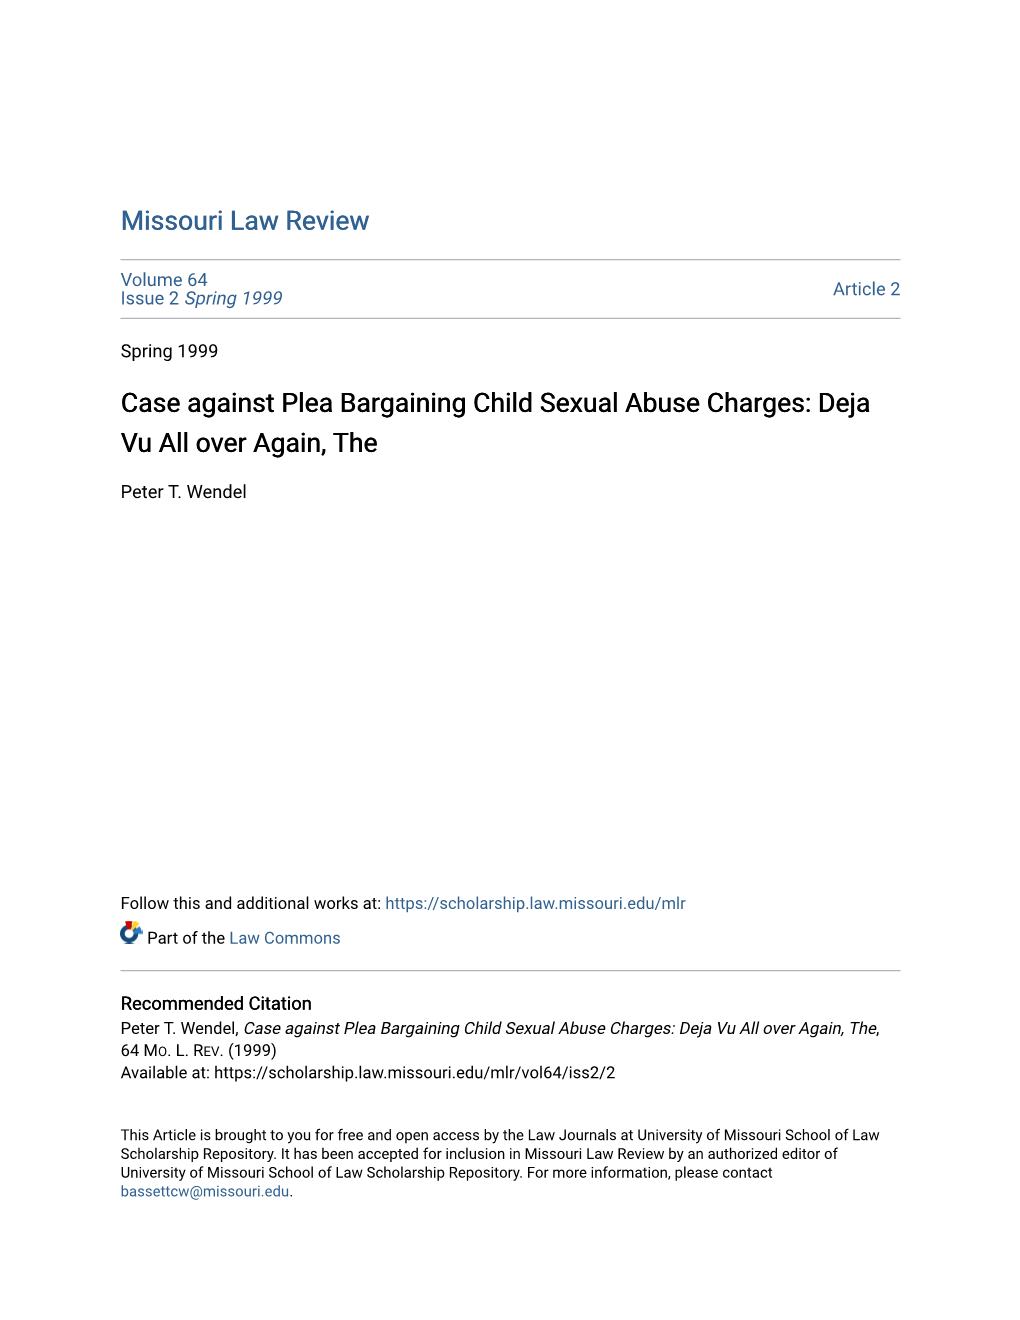 Case Against Plea Bargaining Child Sexual Abuse Charges: Deja Vu All Over Again, The